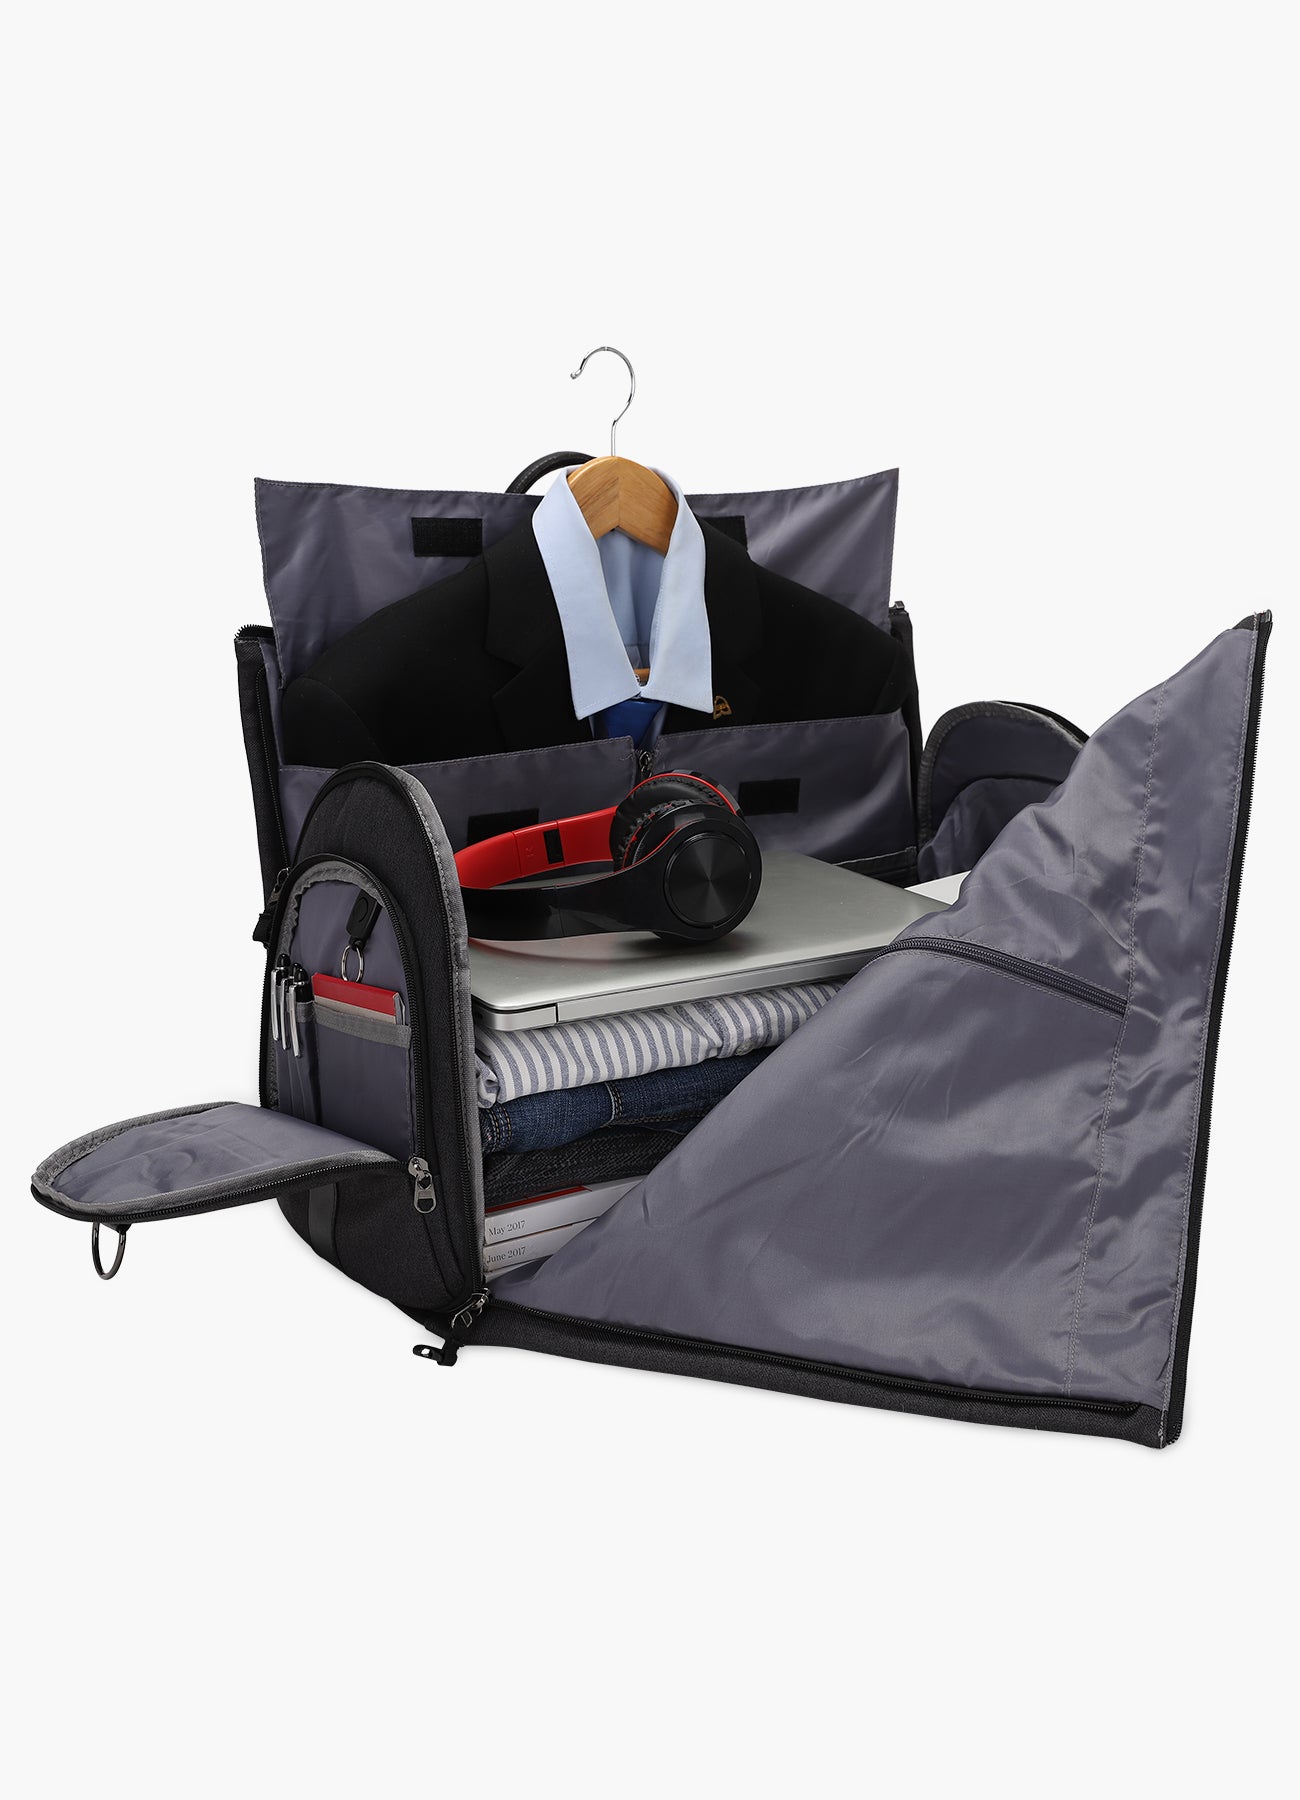 Garment Bag for Travel With Toiletry Bag Convertible